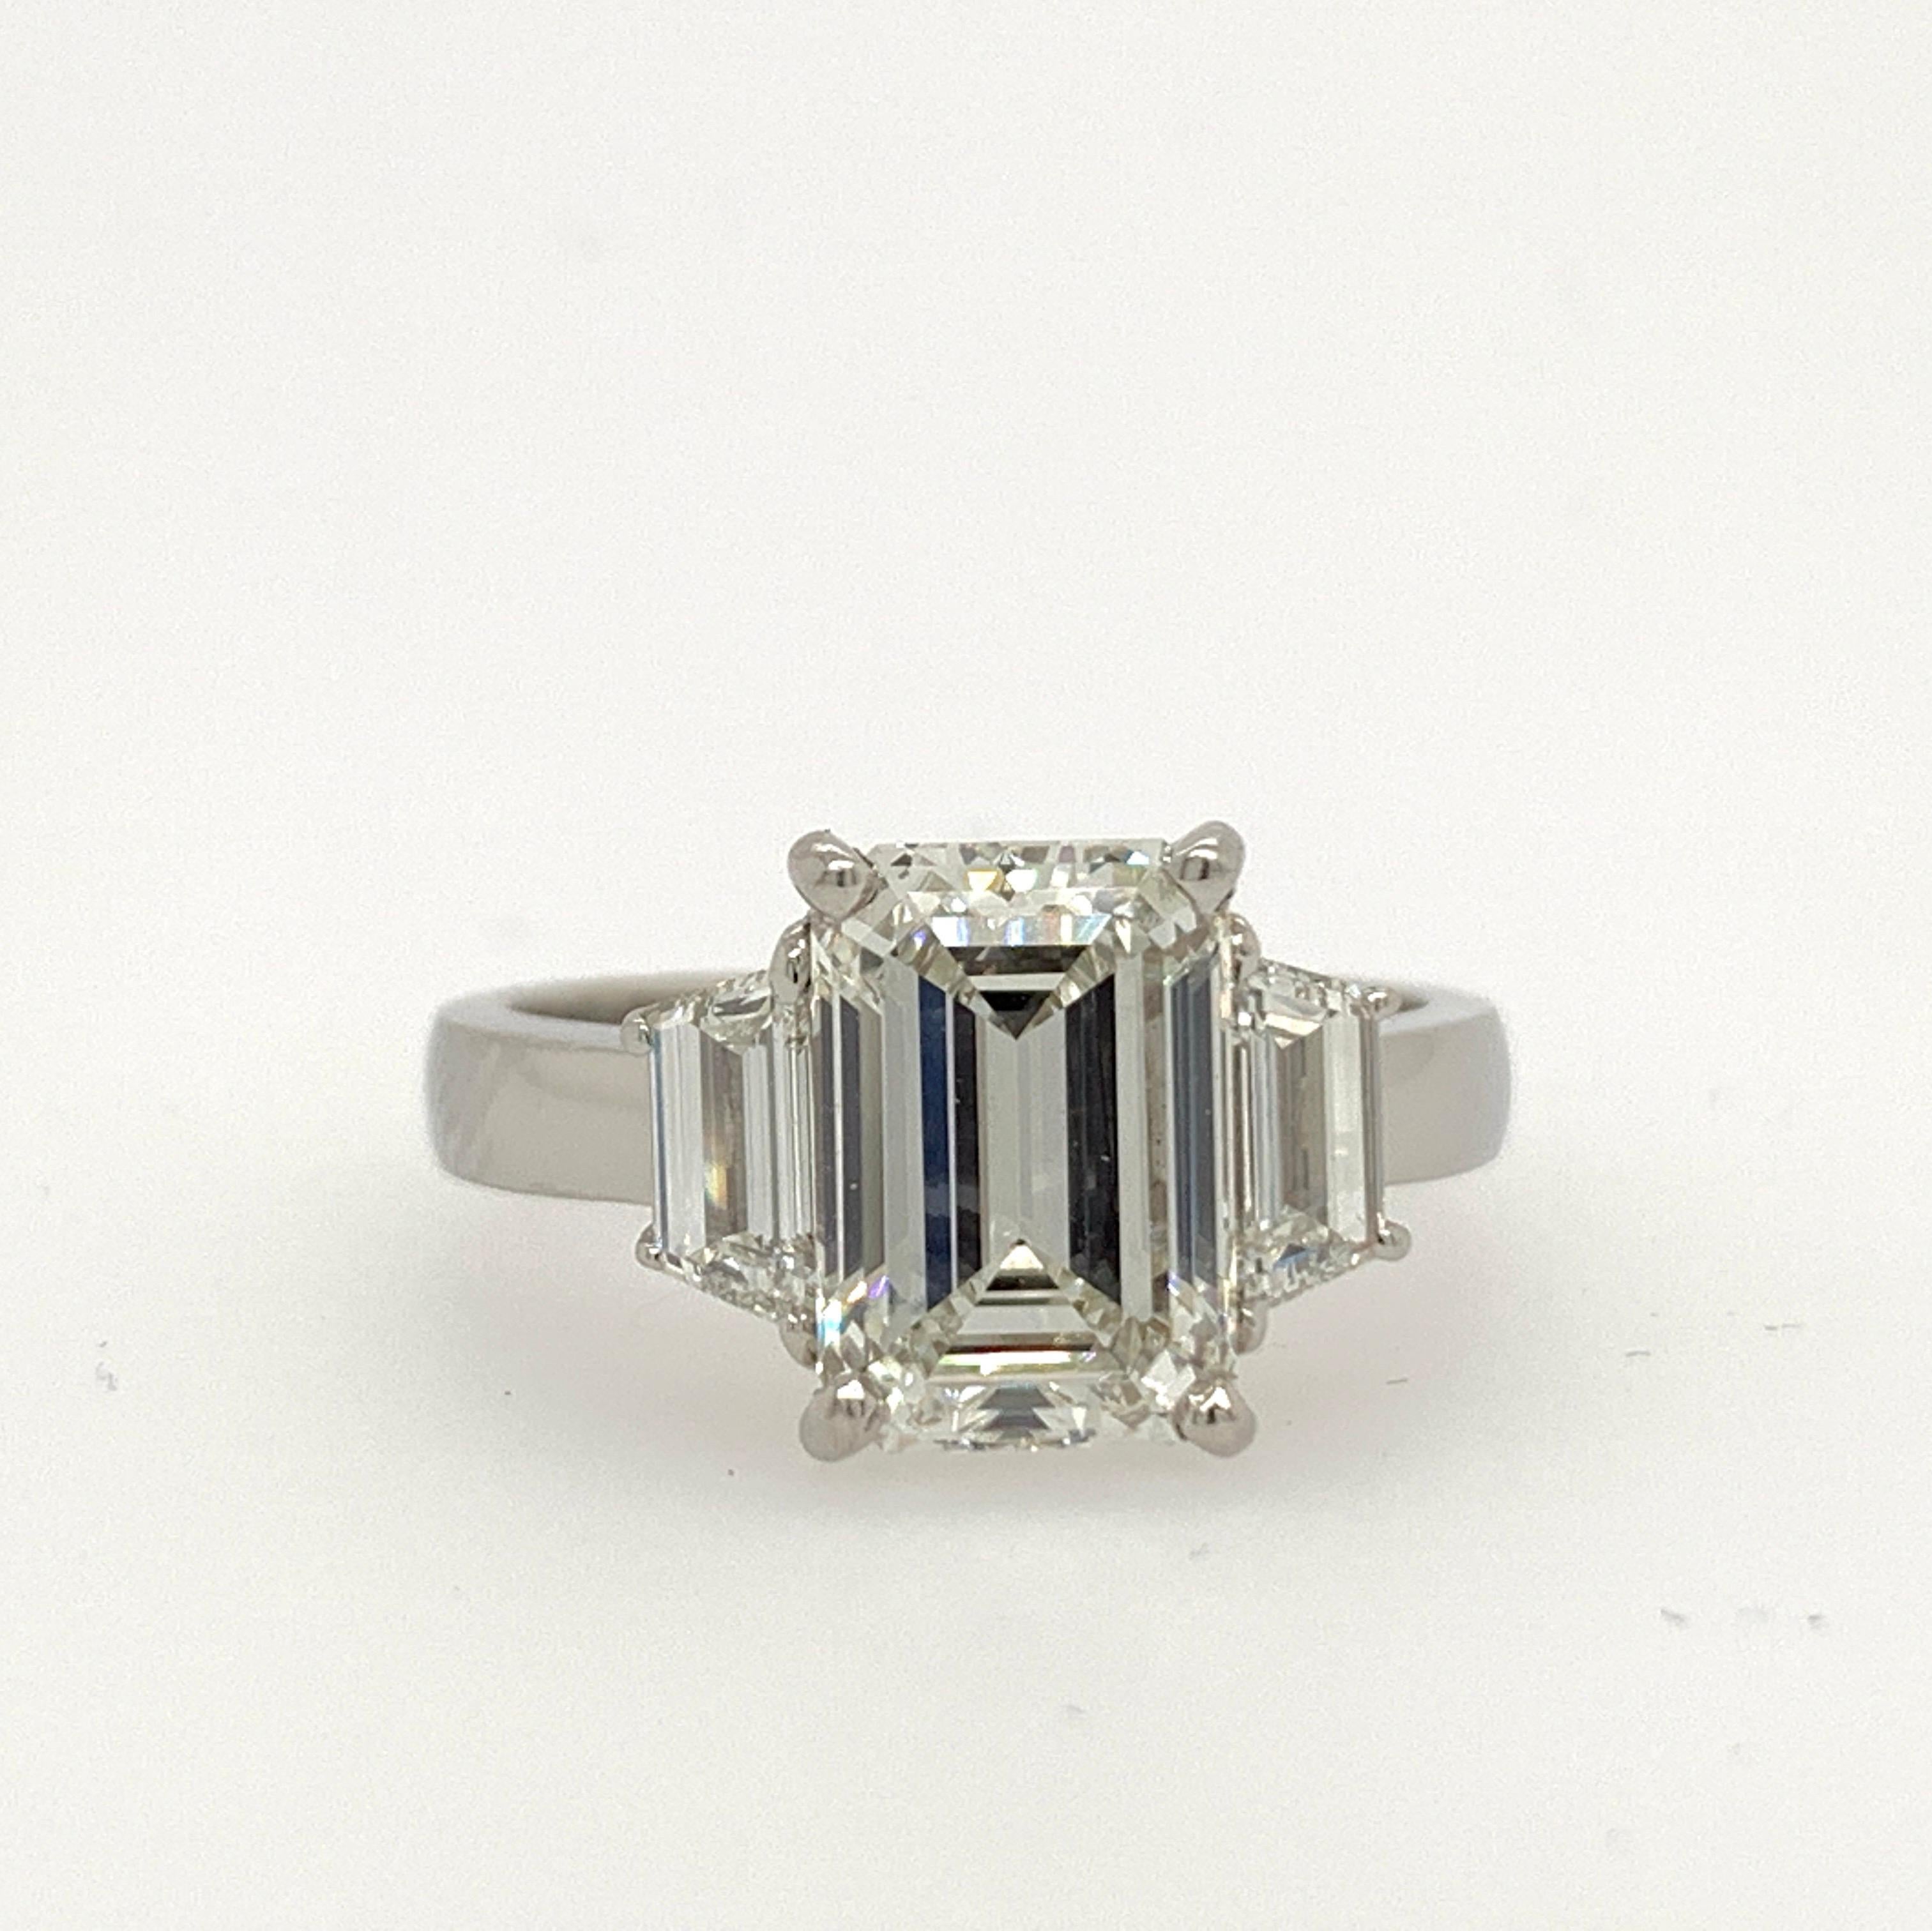 Platinum Ring set with a rectangular emerald cut certified diamond flanked with a matching pair of step-cut trapezoids (weighing 0.80 carats) with similar color and clarity. 

Total weight is 3.32 carats.

The centerstone is rectangular and almost